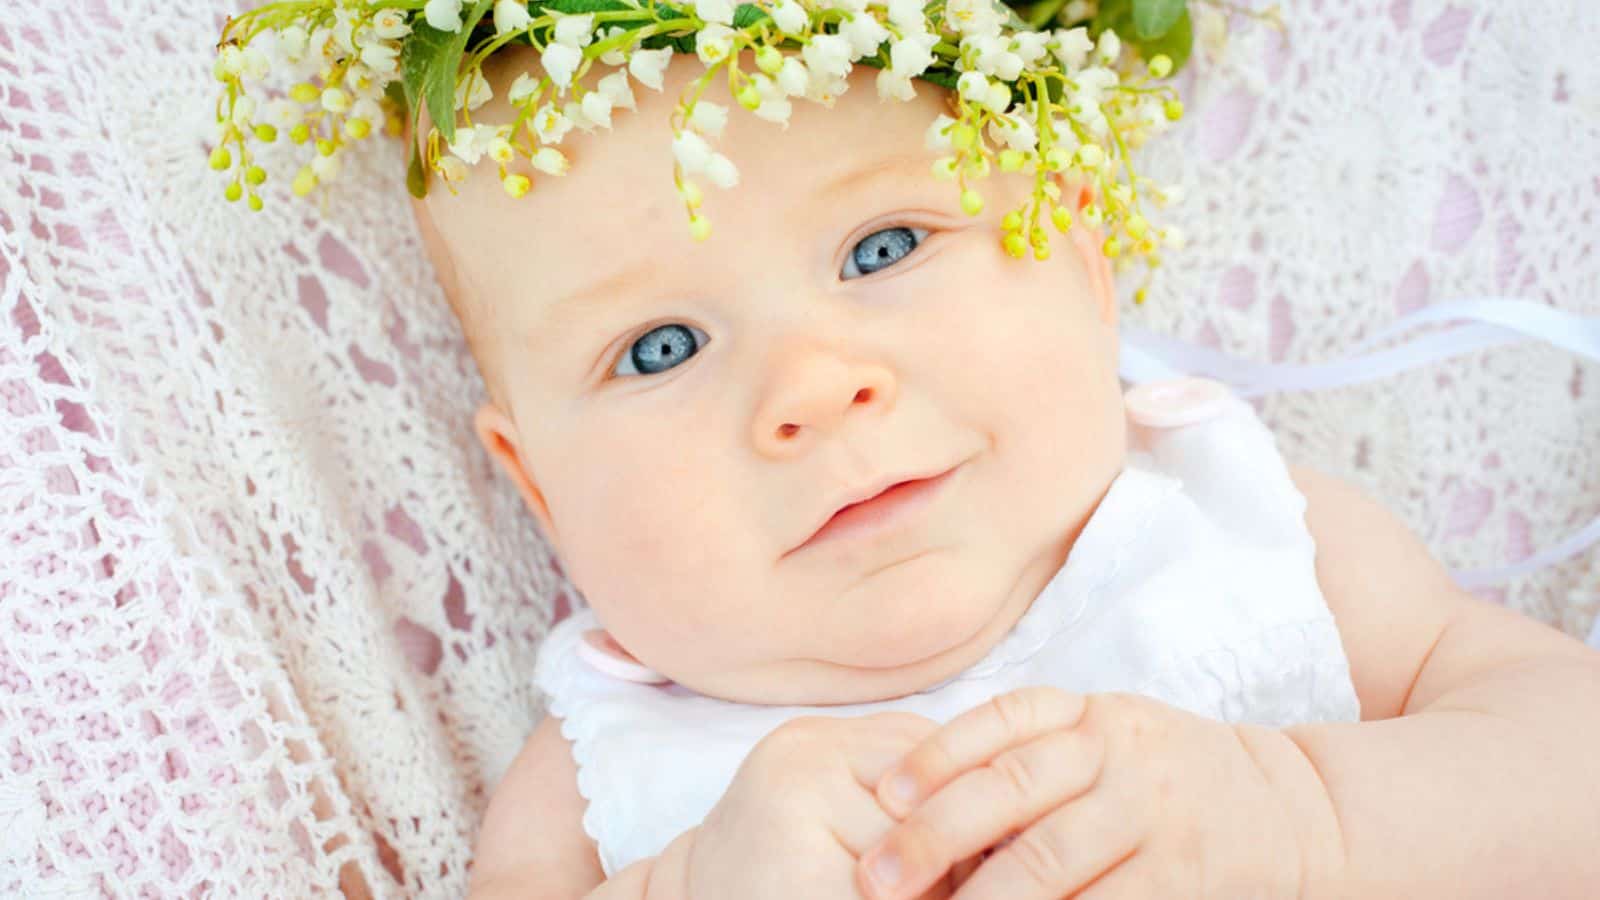 Cute baby and flower lily of the valley.jpg